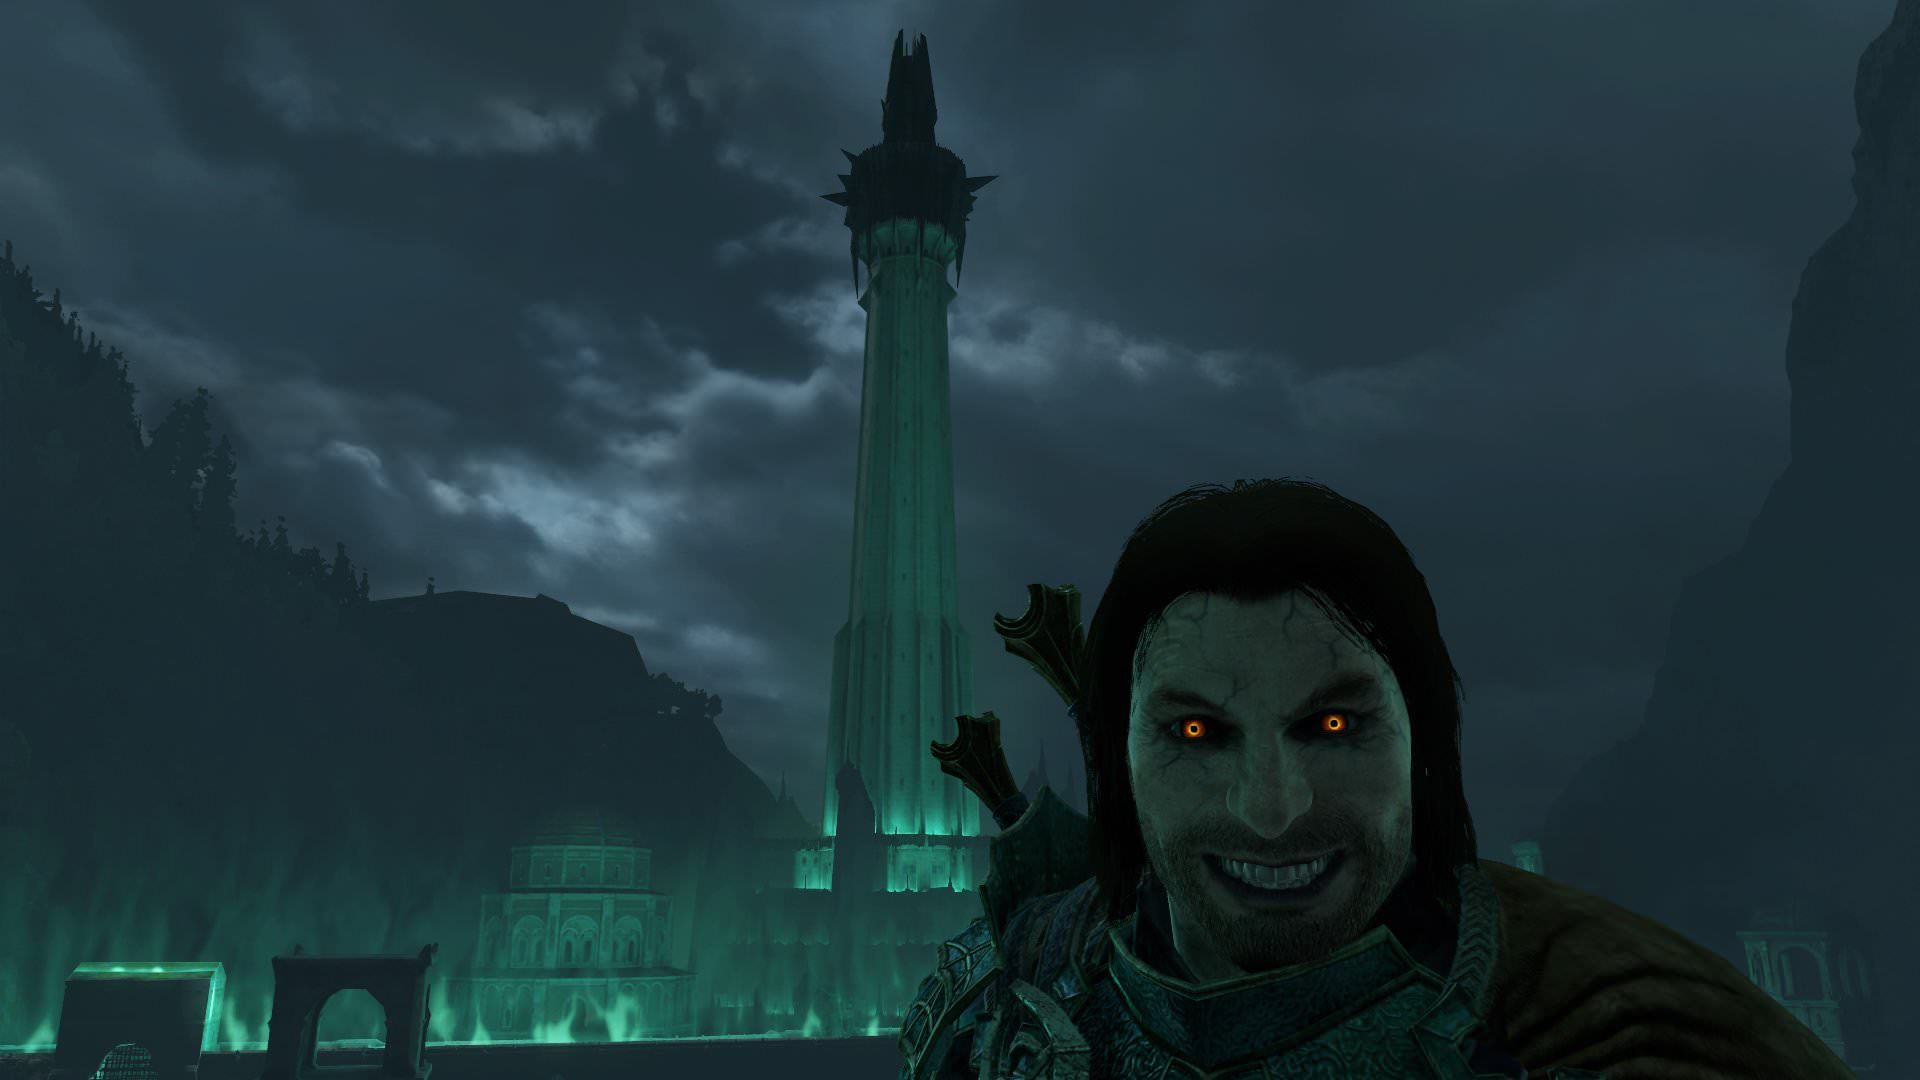 Greetings from Minas Morgul